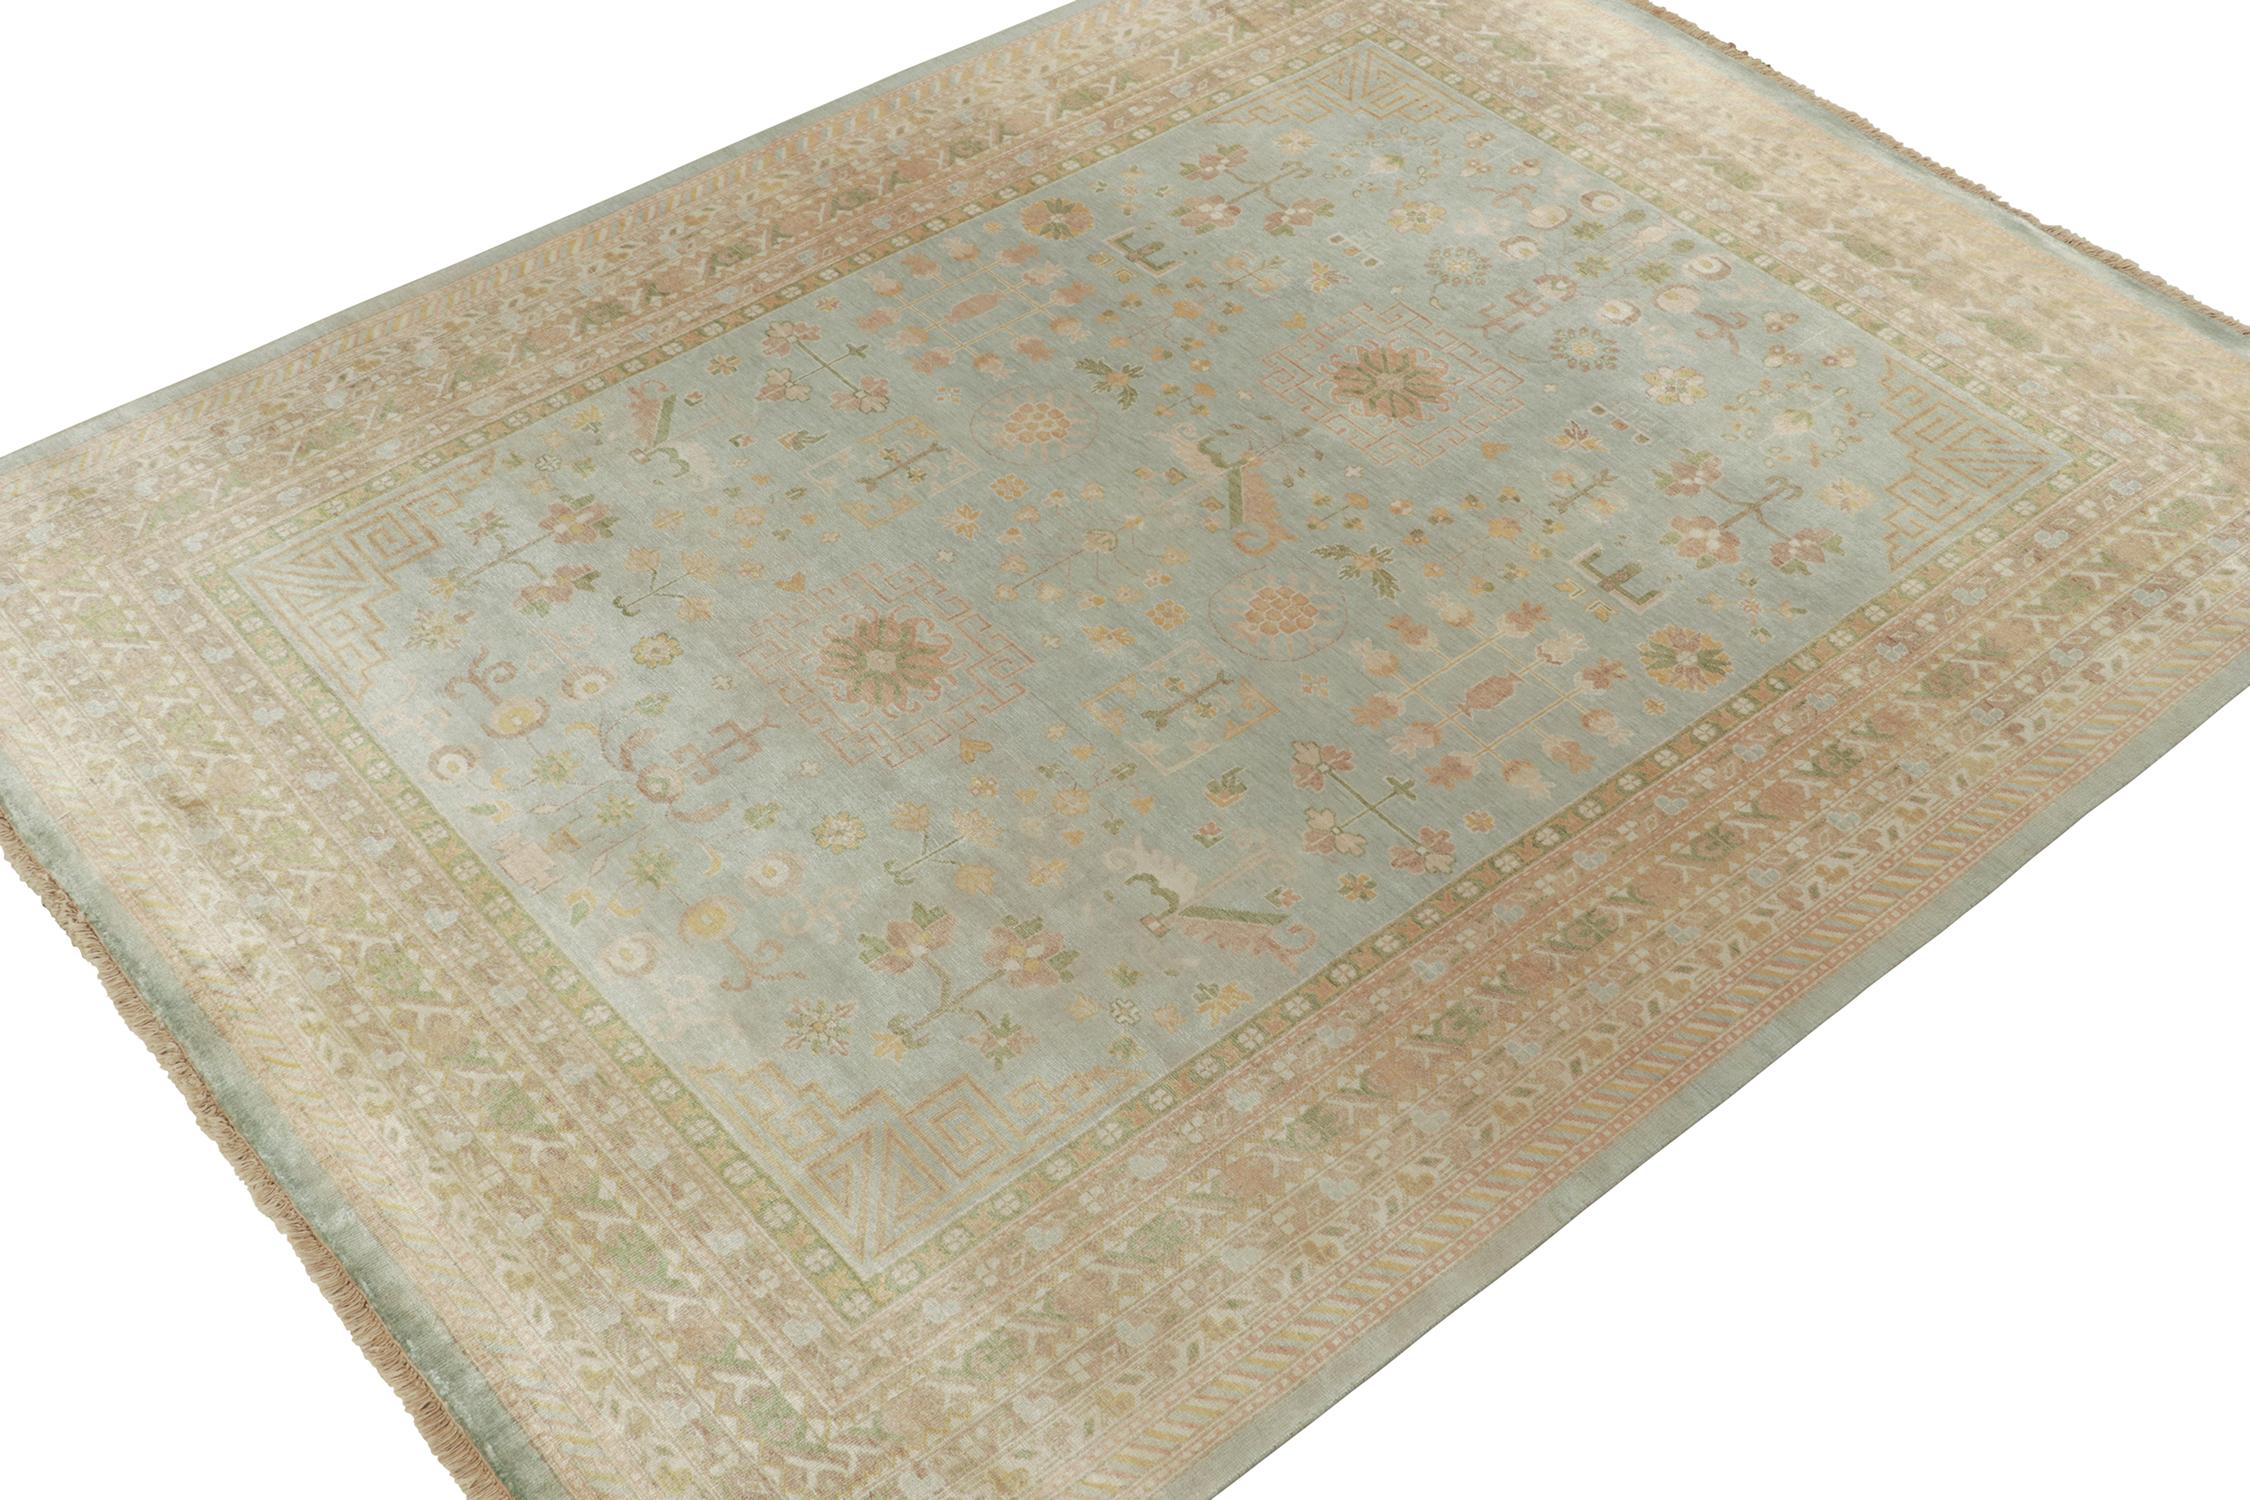 An 8x10 rug inspired from antique Khotan rug styles, from Rug & Kilim’s Modern Classics Collection. Hand knotted in silk, playing a gorgeous blue with gold, beige-brown and green in gorgeous, detailed floral patterns.
Further On the Design:
The